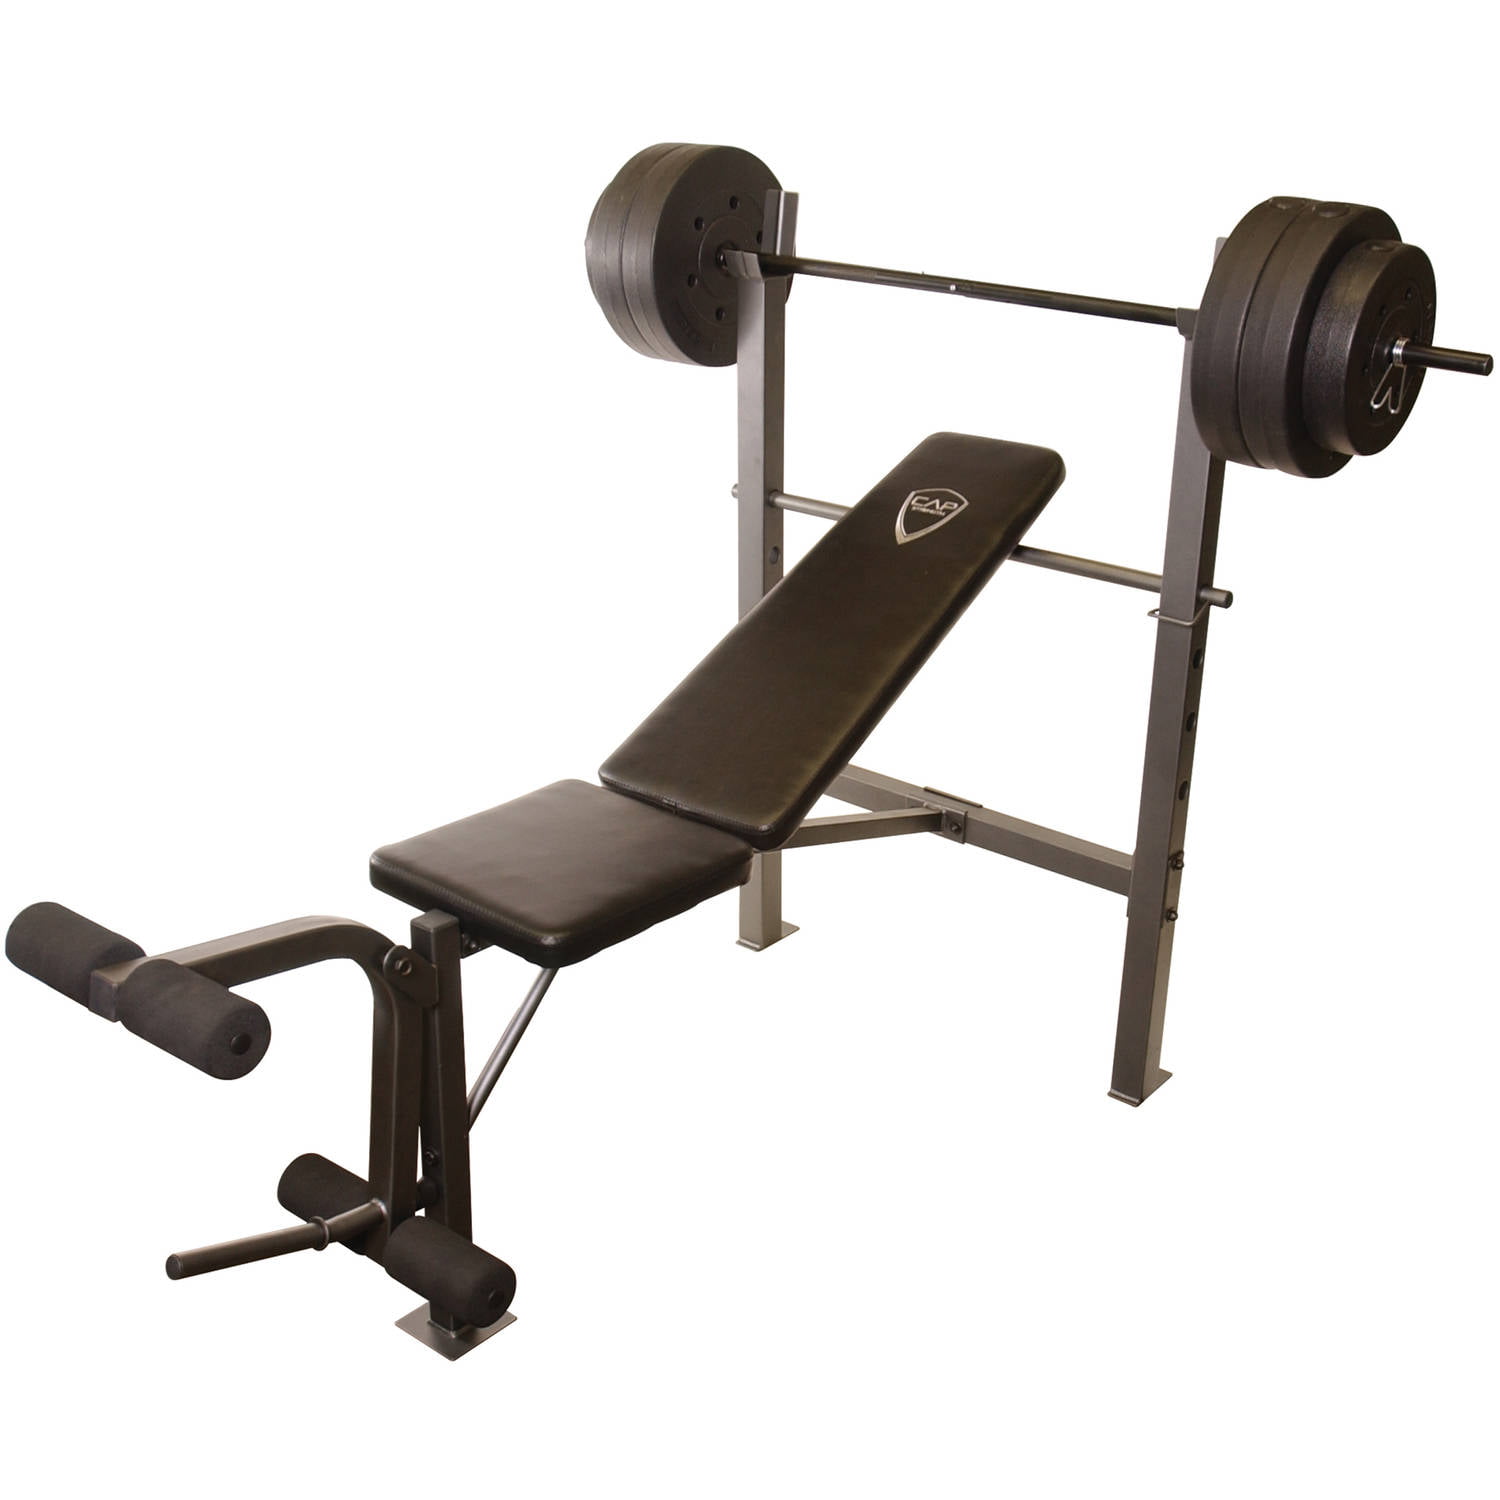 Cap Strength Weight Bench With Weights Adjustable Weightlifting Press 100 lb Set 